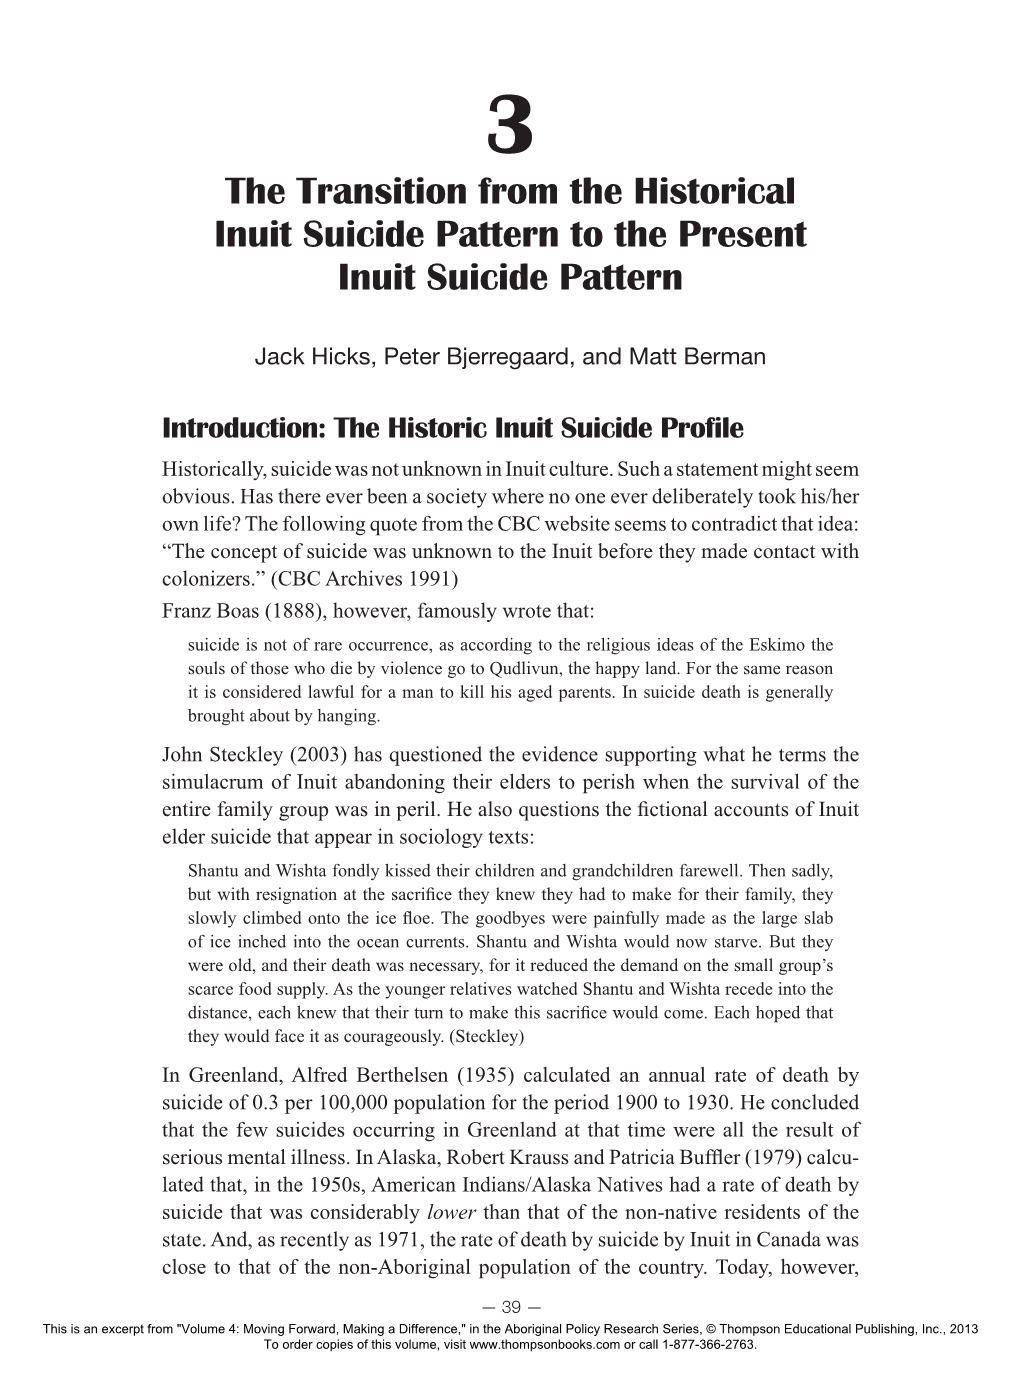 The Transition from the Historical Inuit Suicide Pattern to the Present Inuit Suicide Pattern